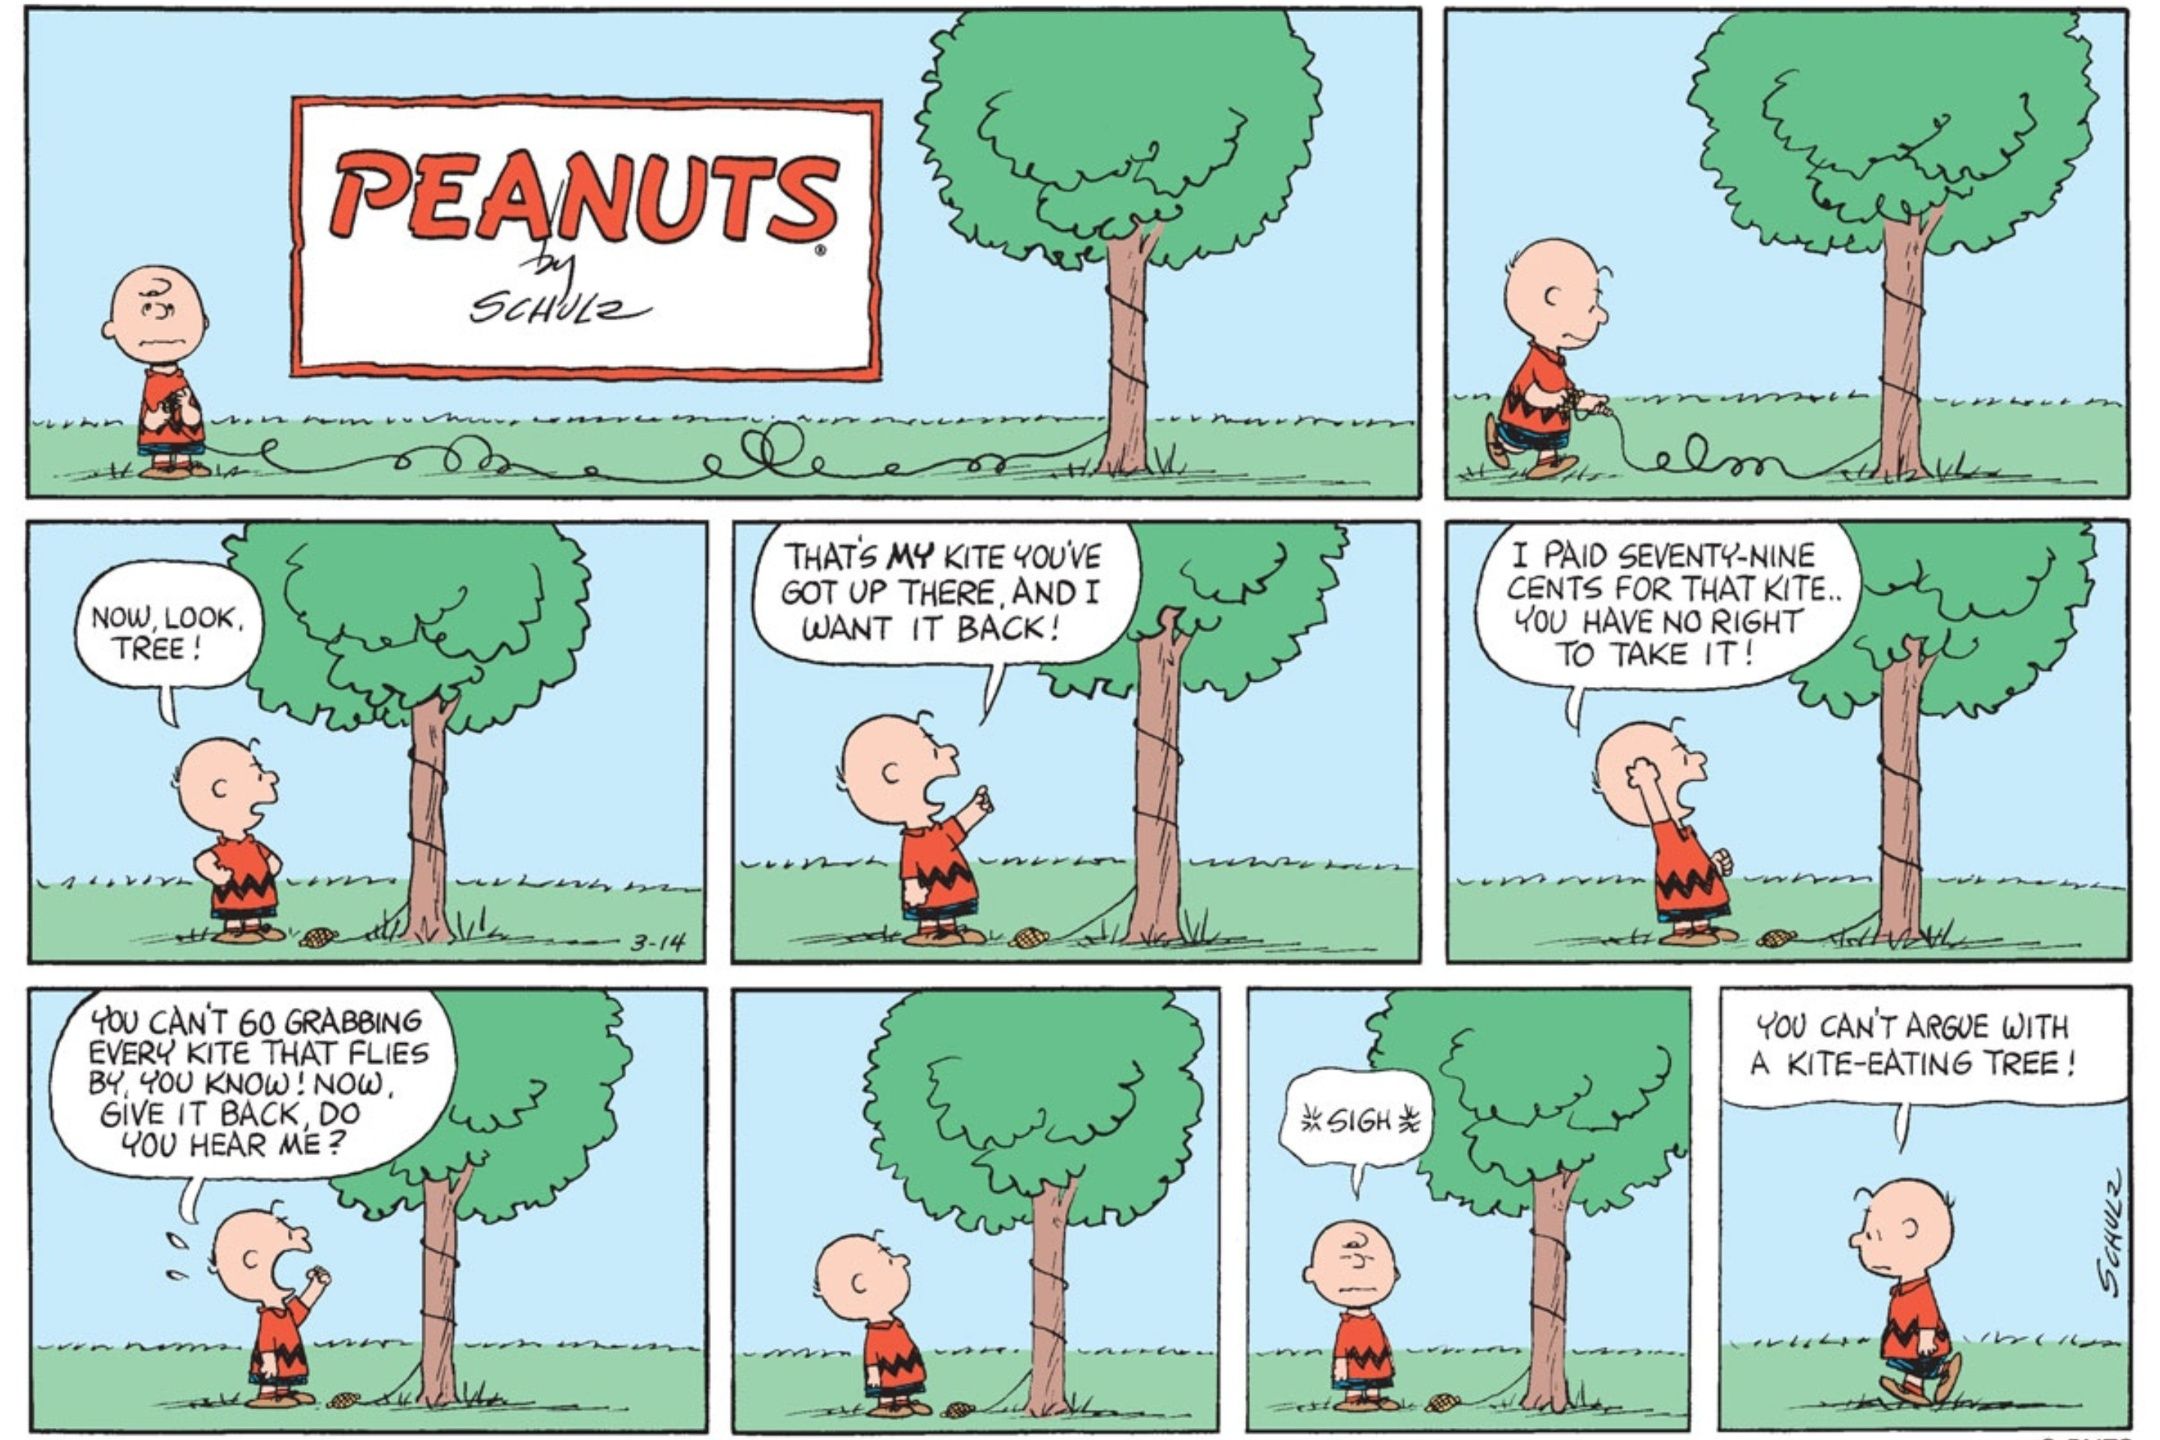 Charlie Brown and the Kite Eating Tree in Peanuts.